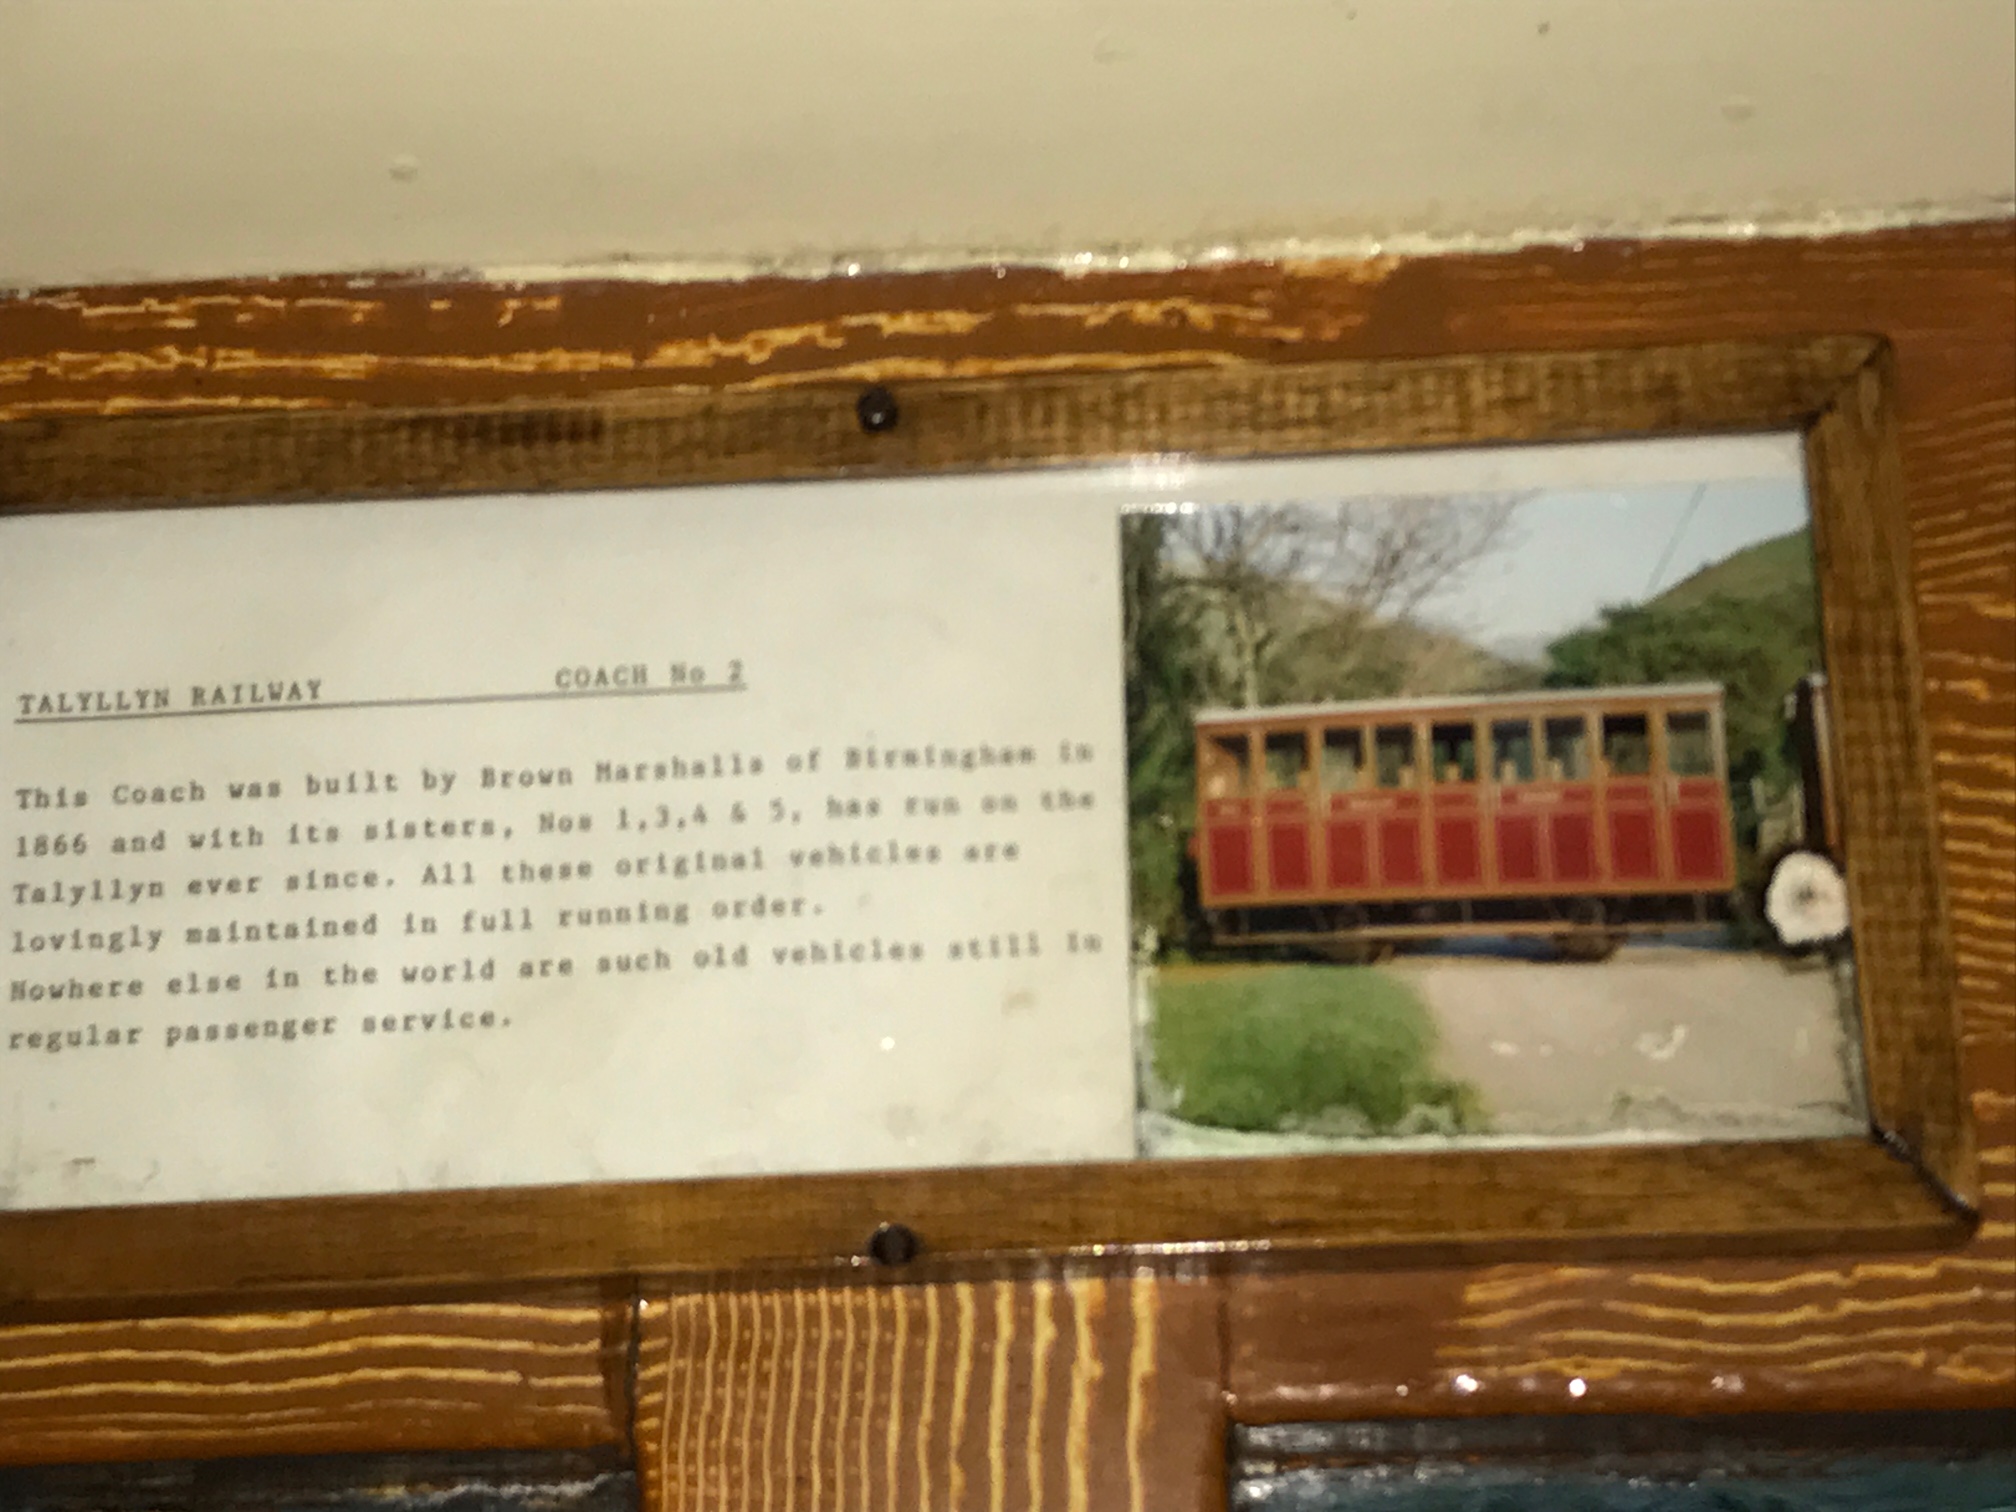 Great Little Trains of Wales: Coach No. 2.